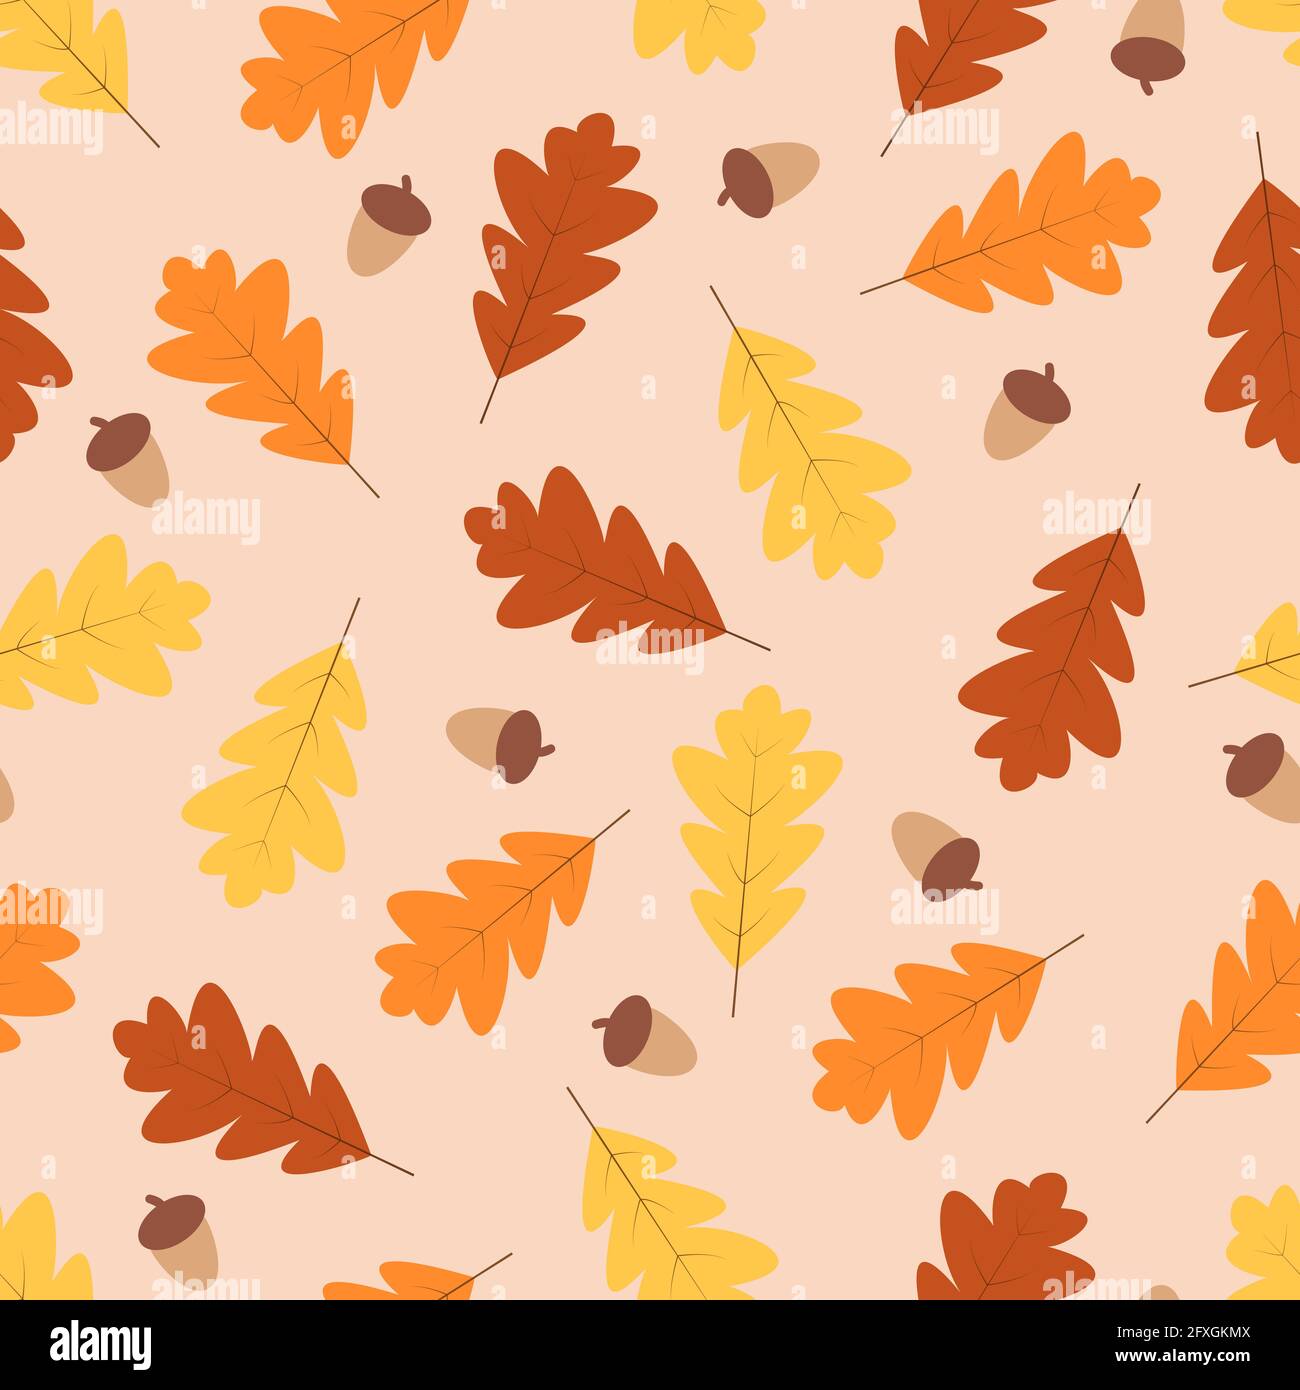 Autumn seamless pattern, yellow and red oak leaves and acorns fall in autumn Stock Photo